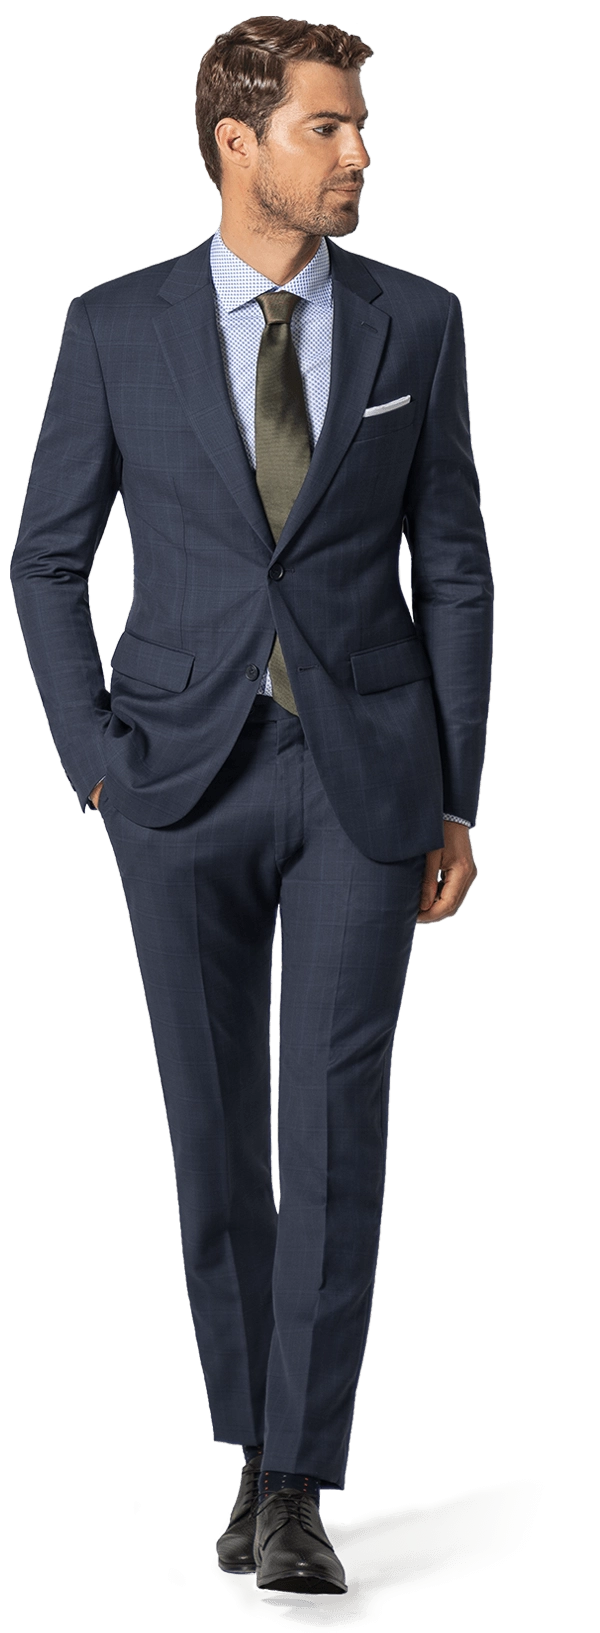 custom made suits online